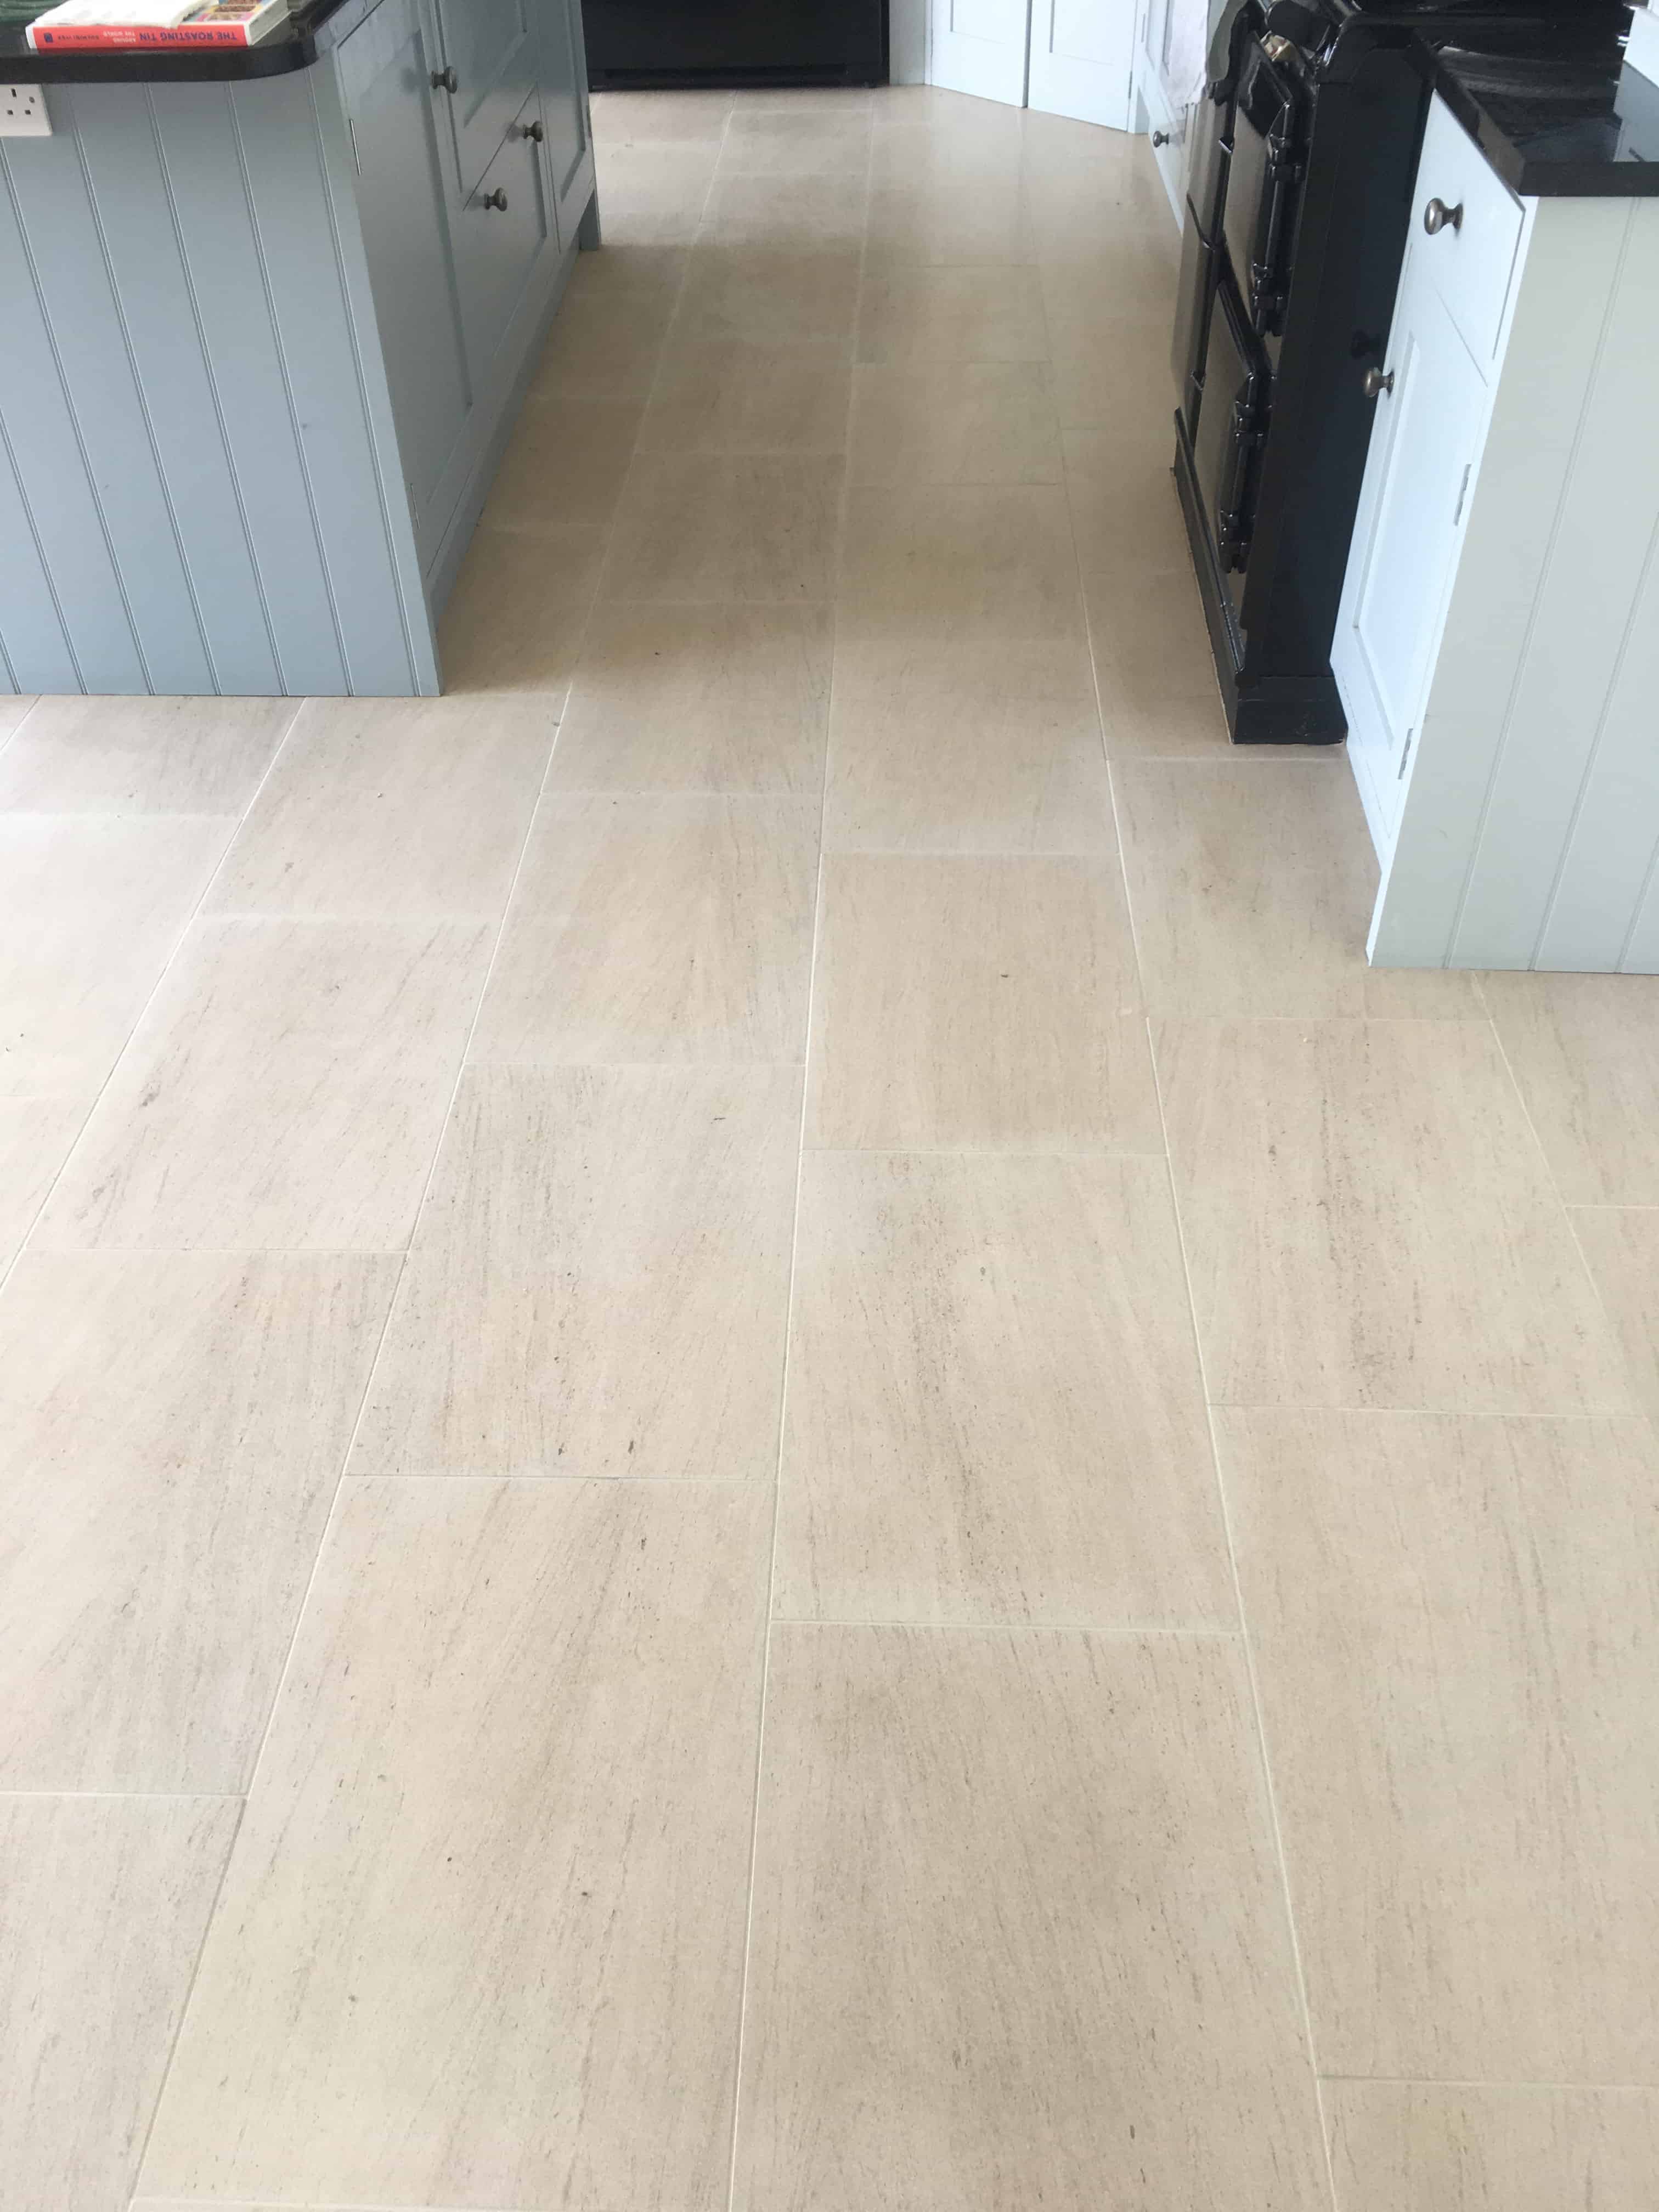 Limestone Floor Tile and Grout After Cleaning in Underriver Sevenoaks